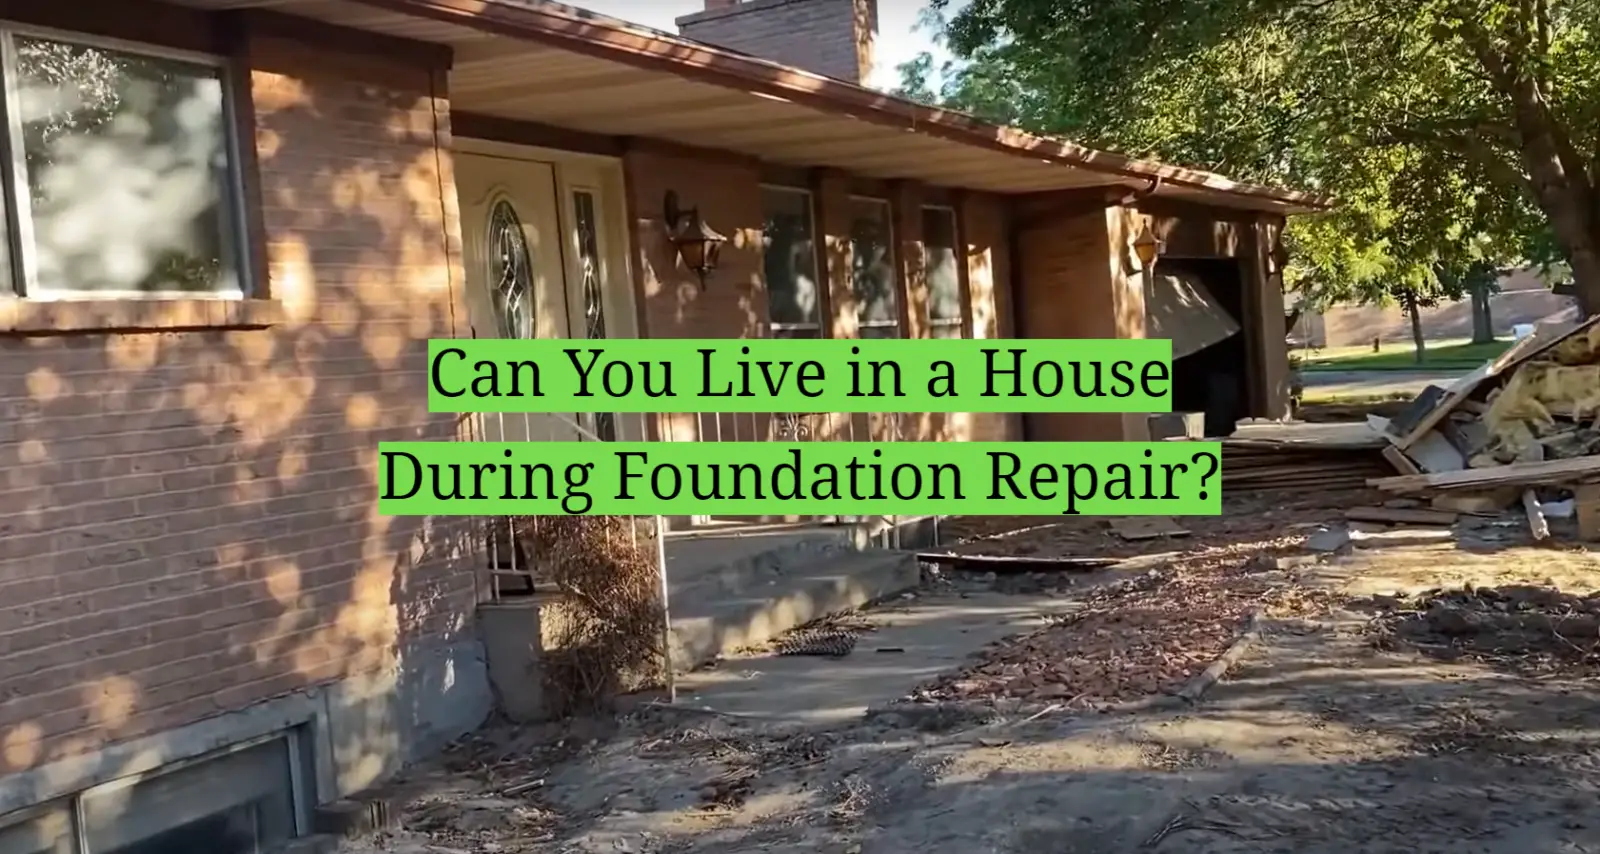 Can You Live in a House During Foundation Repair?